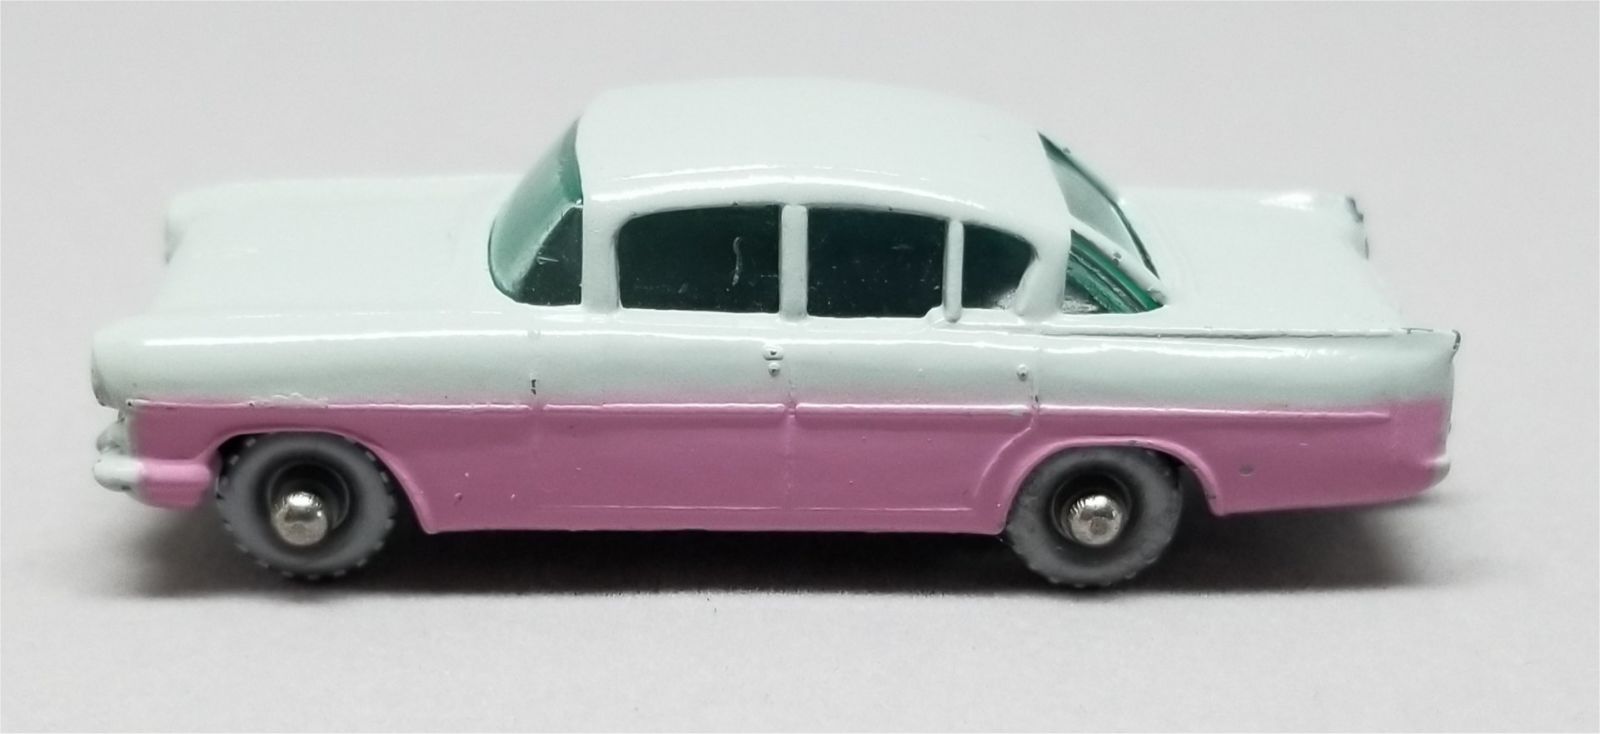 Illustration for article titled [REVIEW] Lesney Matchbox 1958 Vauxhall Cresta (another one)